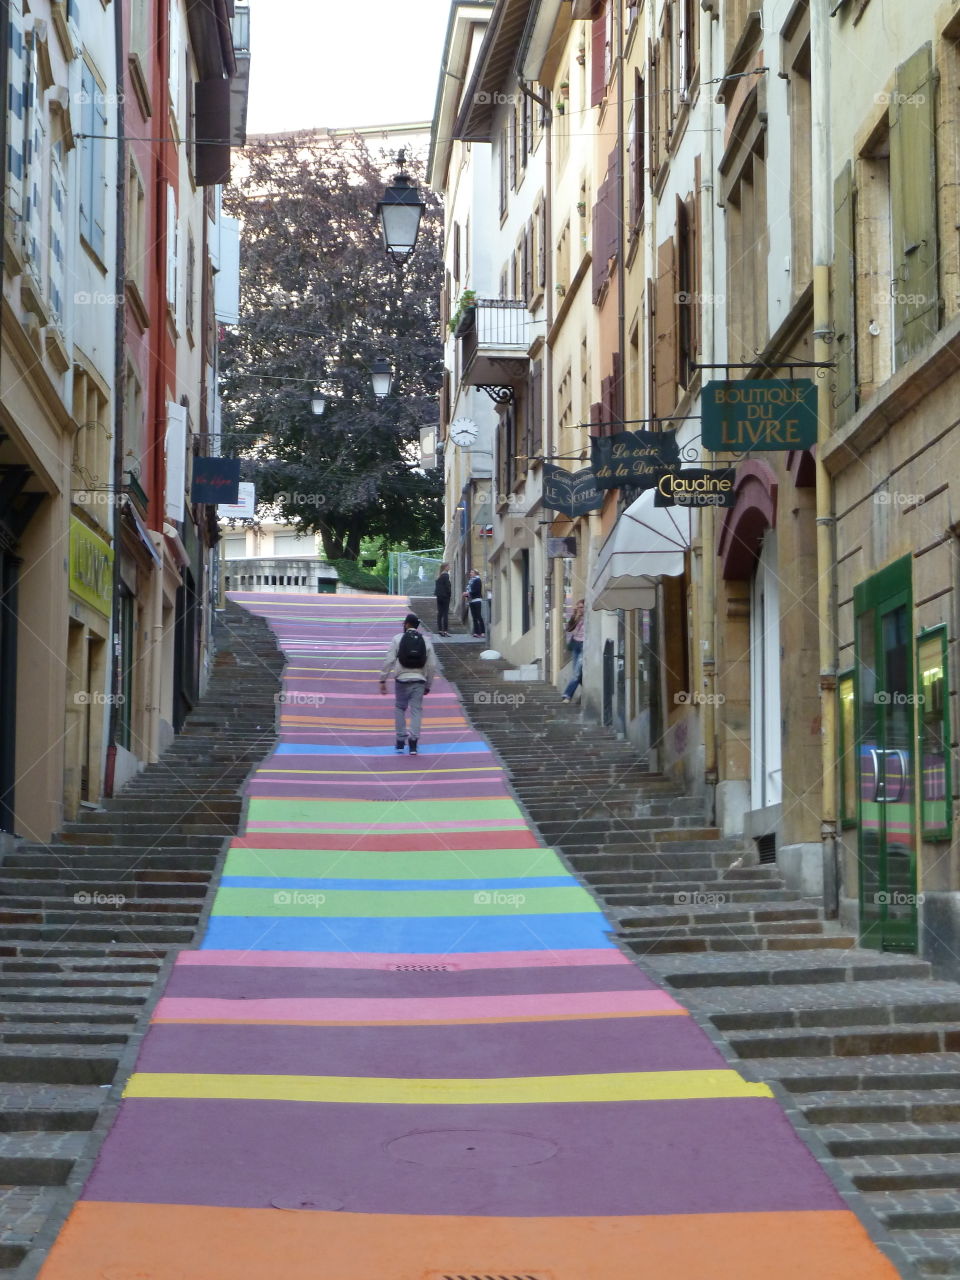 Neuchatel city walking. The small town of Neuchatel in Switzerland is very colorful